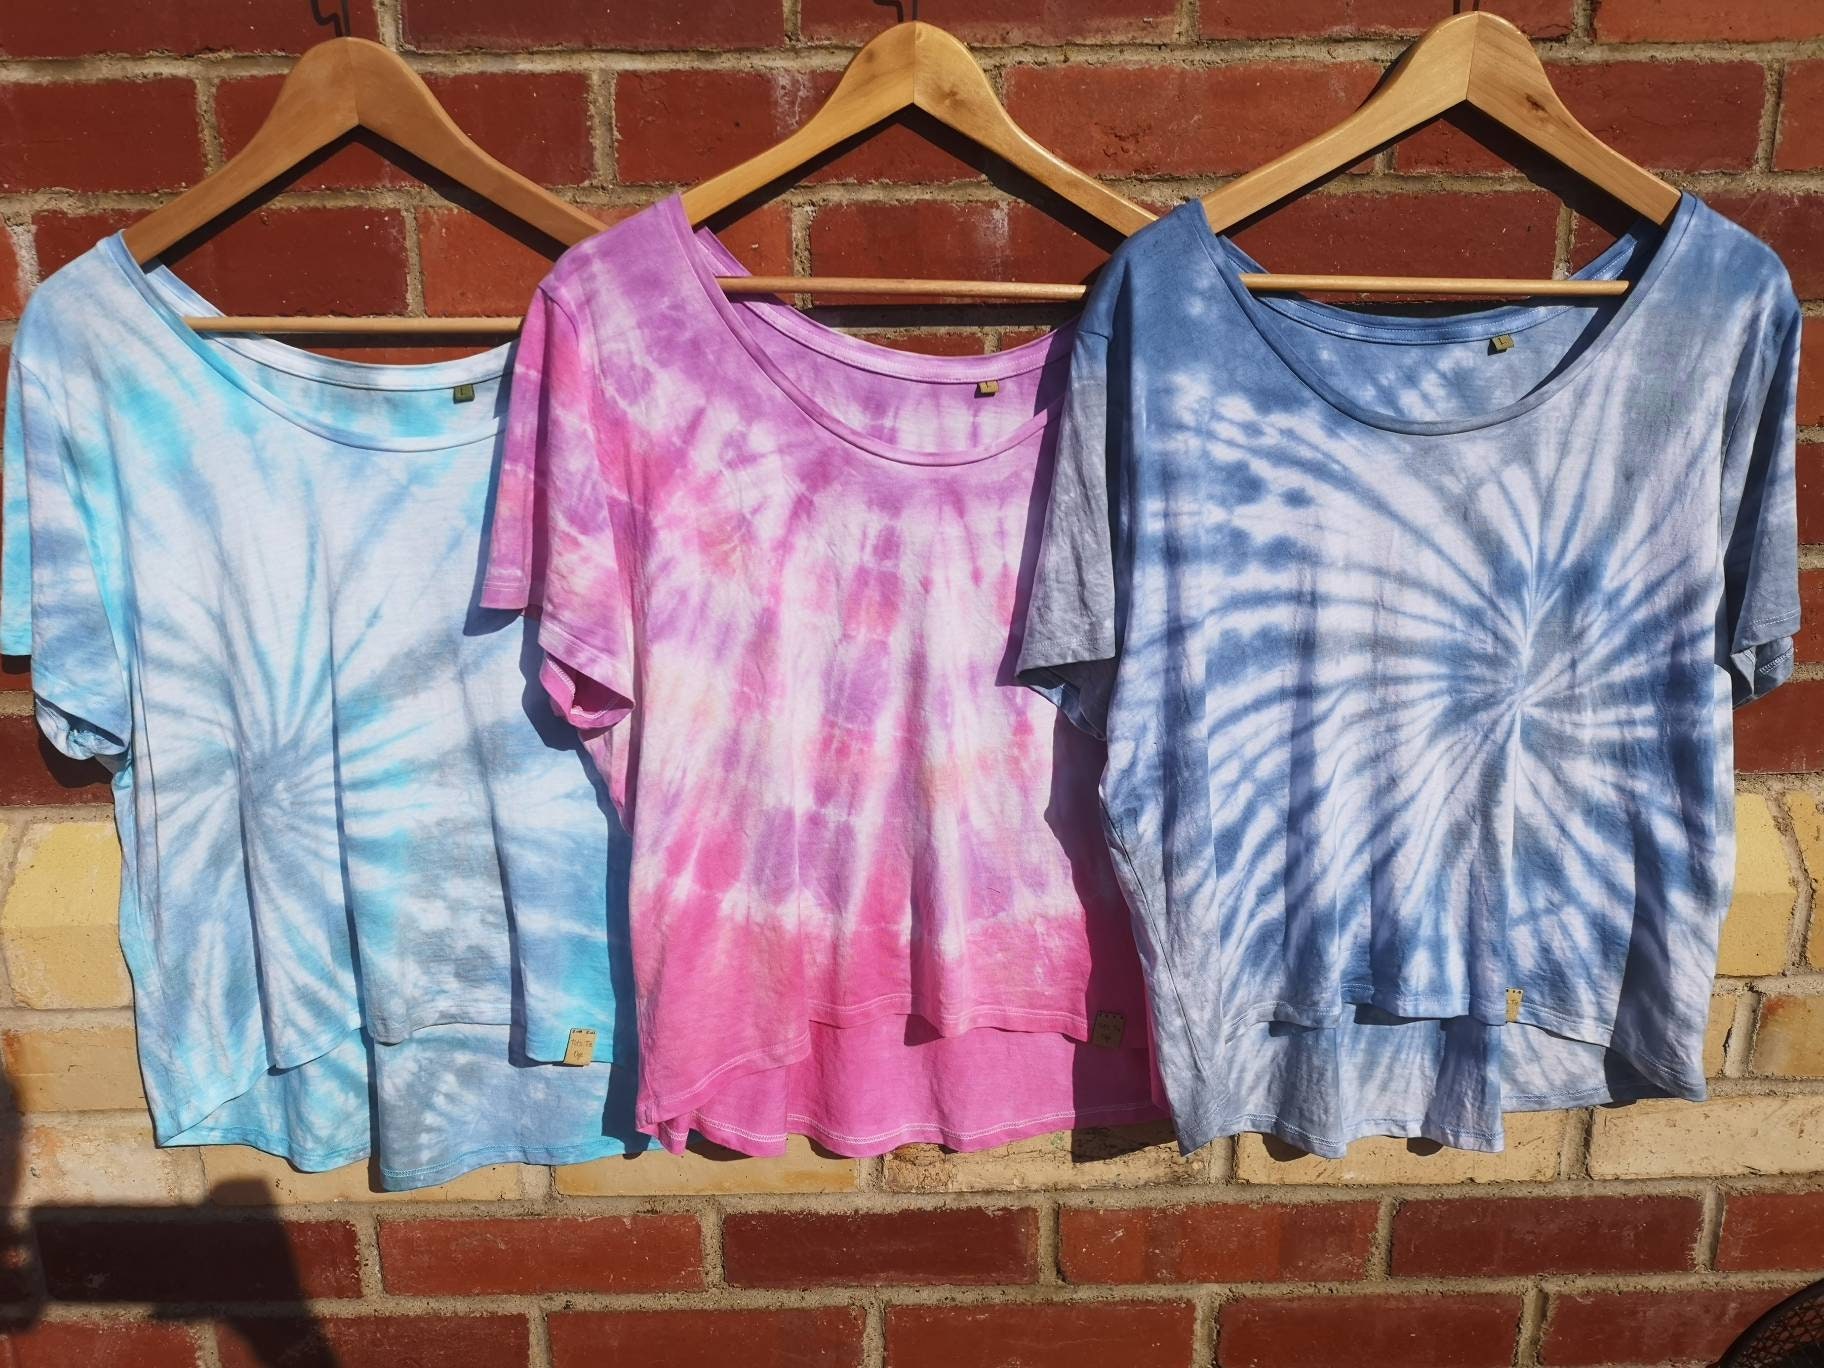 Rainbow Tie Dye Kit, Big 250ml Bottles, Real Fabric Dye, 5 Adult T-shirts  in Bright Colours, Same Day Postage 